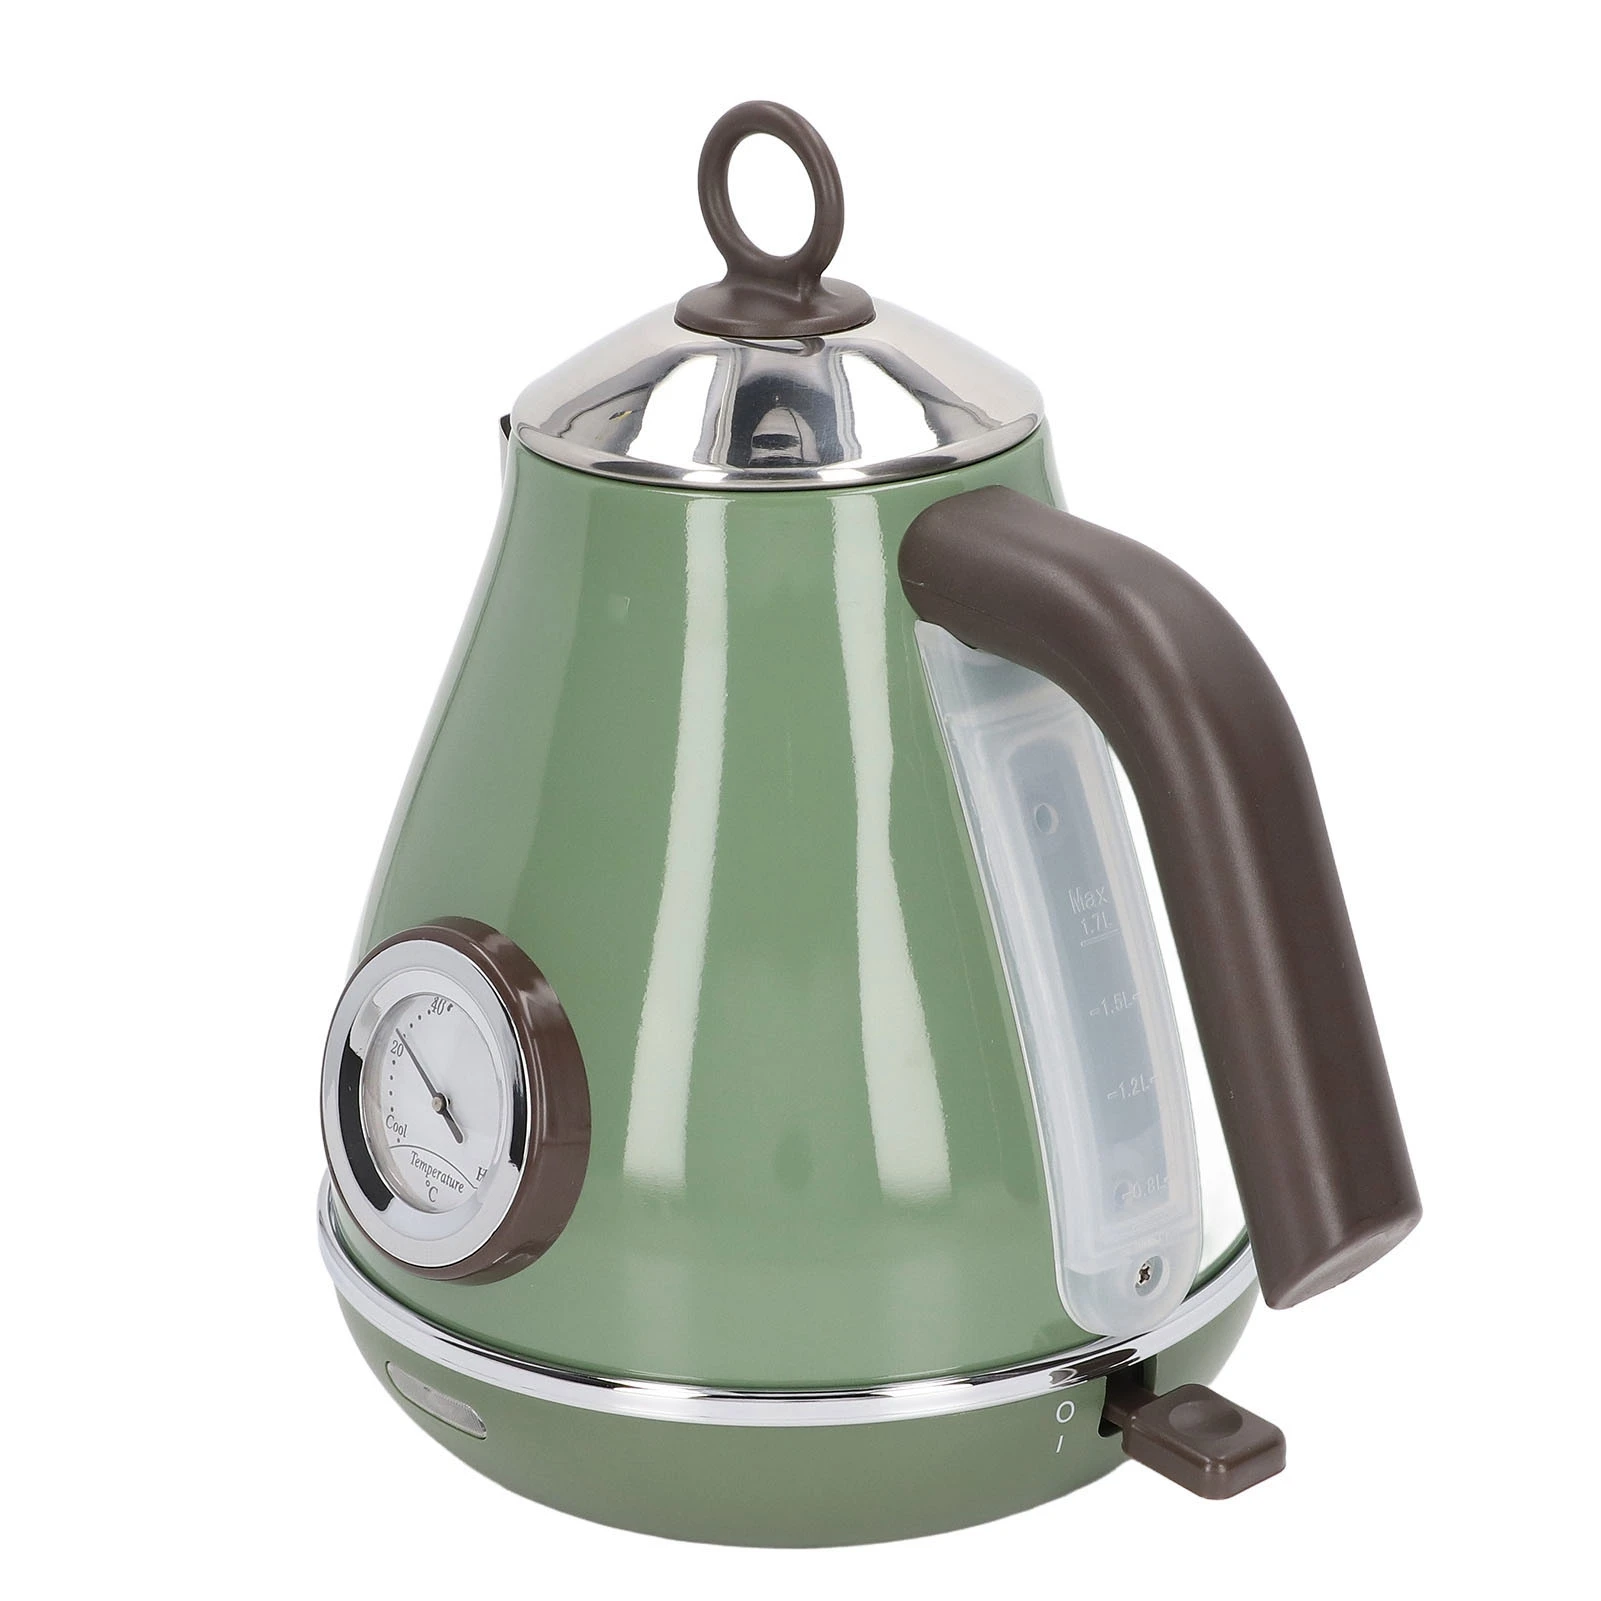 https://ae01.alicdn.com/kf/S9554577b6a004a31b3ff273a39131480c/Electric-Hot-Water-Kettle-Retro-Paint-Process-Quick-Boil-Electric-Water-Kettle-Dry-Burn-Protection-EU.jpg